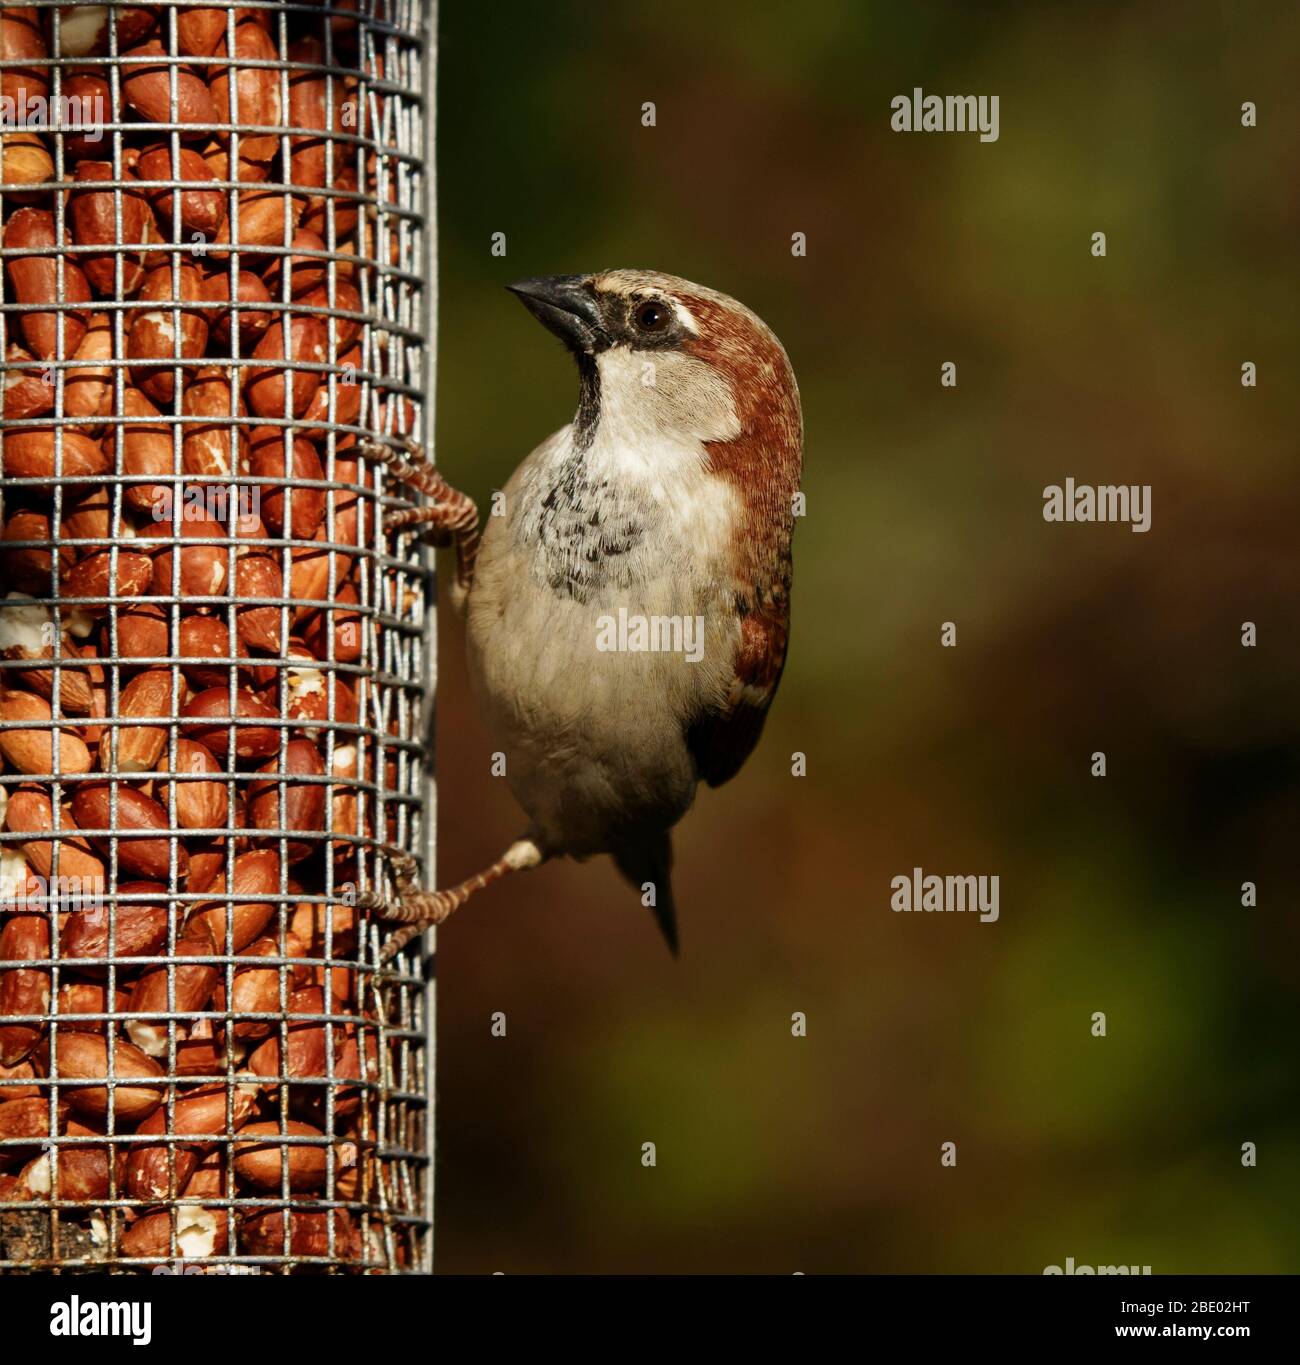 Male sparrow on a mesh feeder Stock Photo